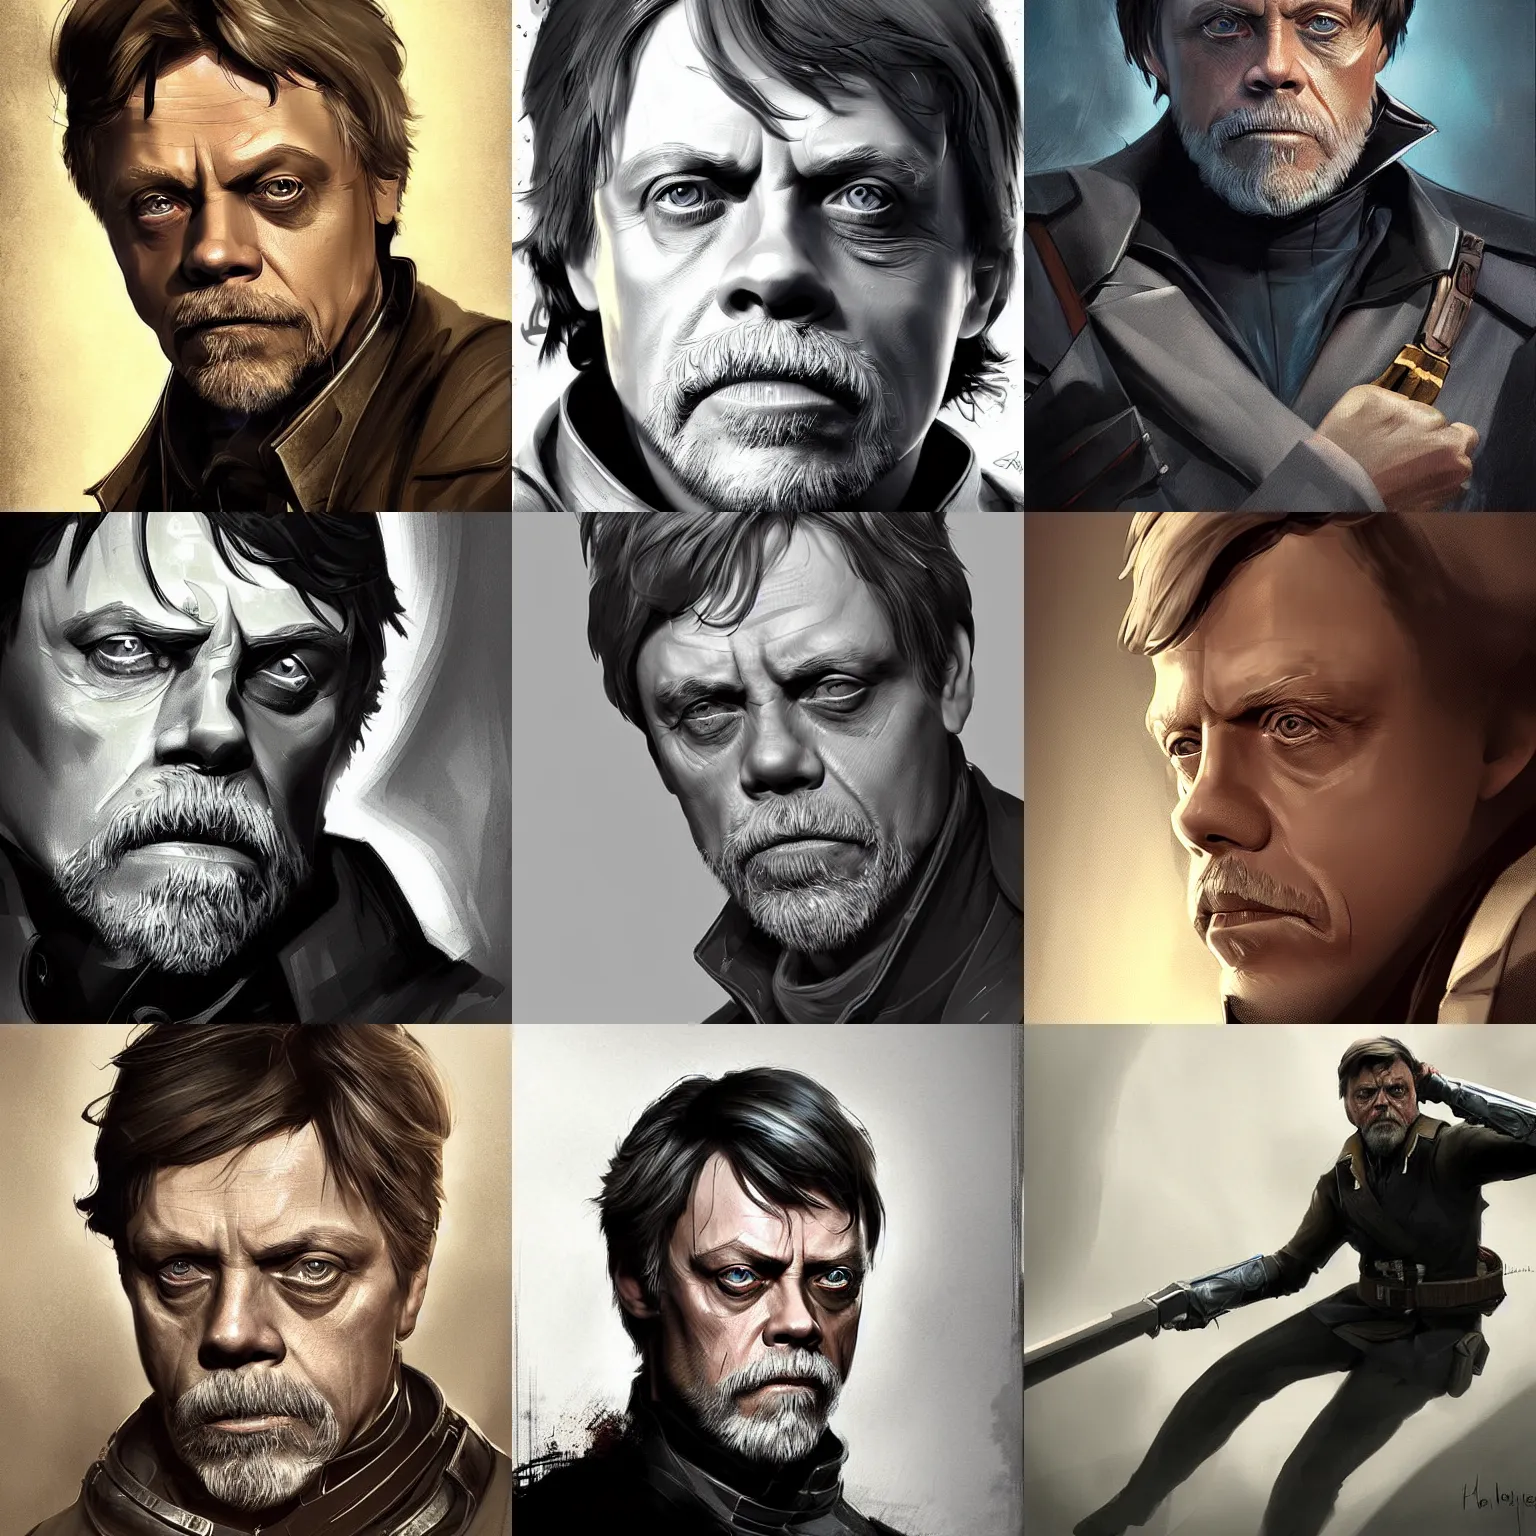 Mark Hamill Young by Klench-Art on DeviantArt